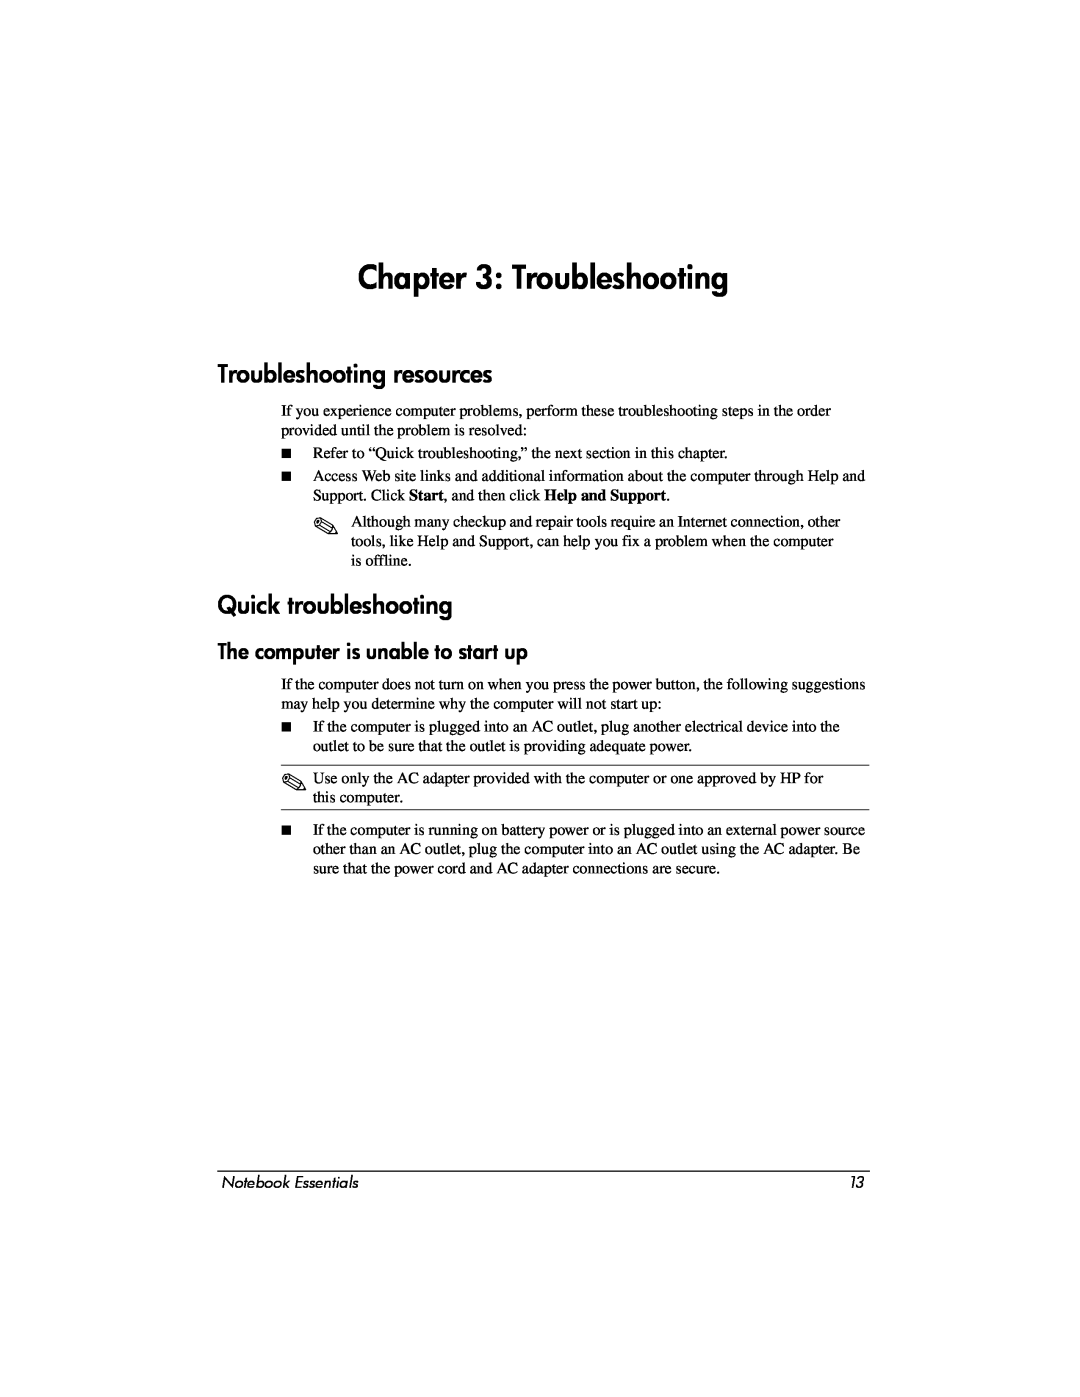 HP CQ62z-300 Troubleshooting resources, Quick troubleshooting, The computer is unable to start up, Notebook Essentials 